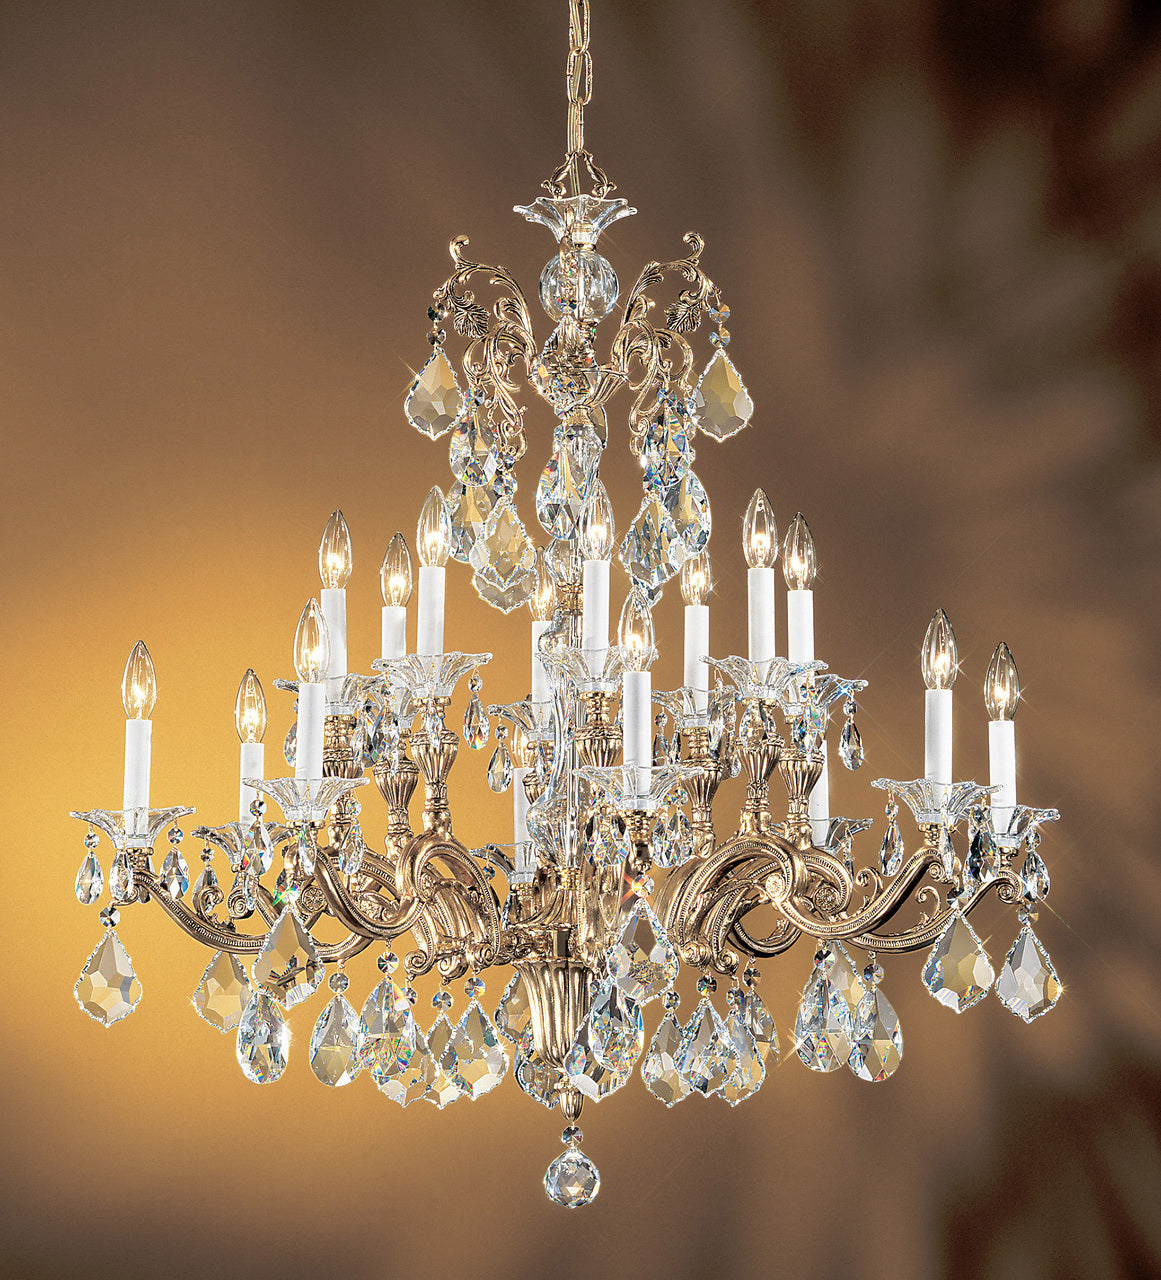 Classic Lighting 57116 BBK S Via Firenze Crystal Chandelier in Bronze/Black Patina (Imported from Spain)